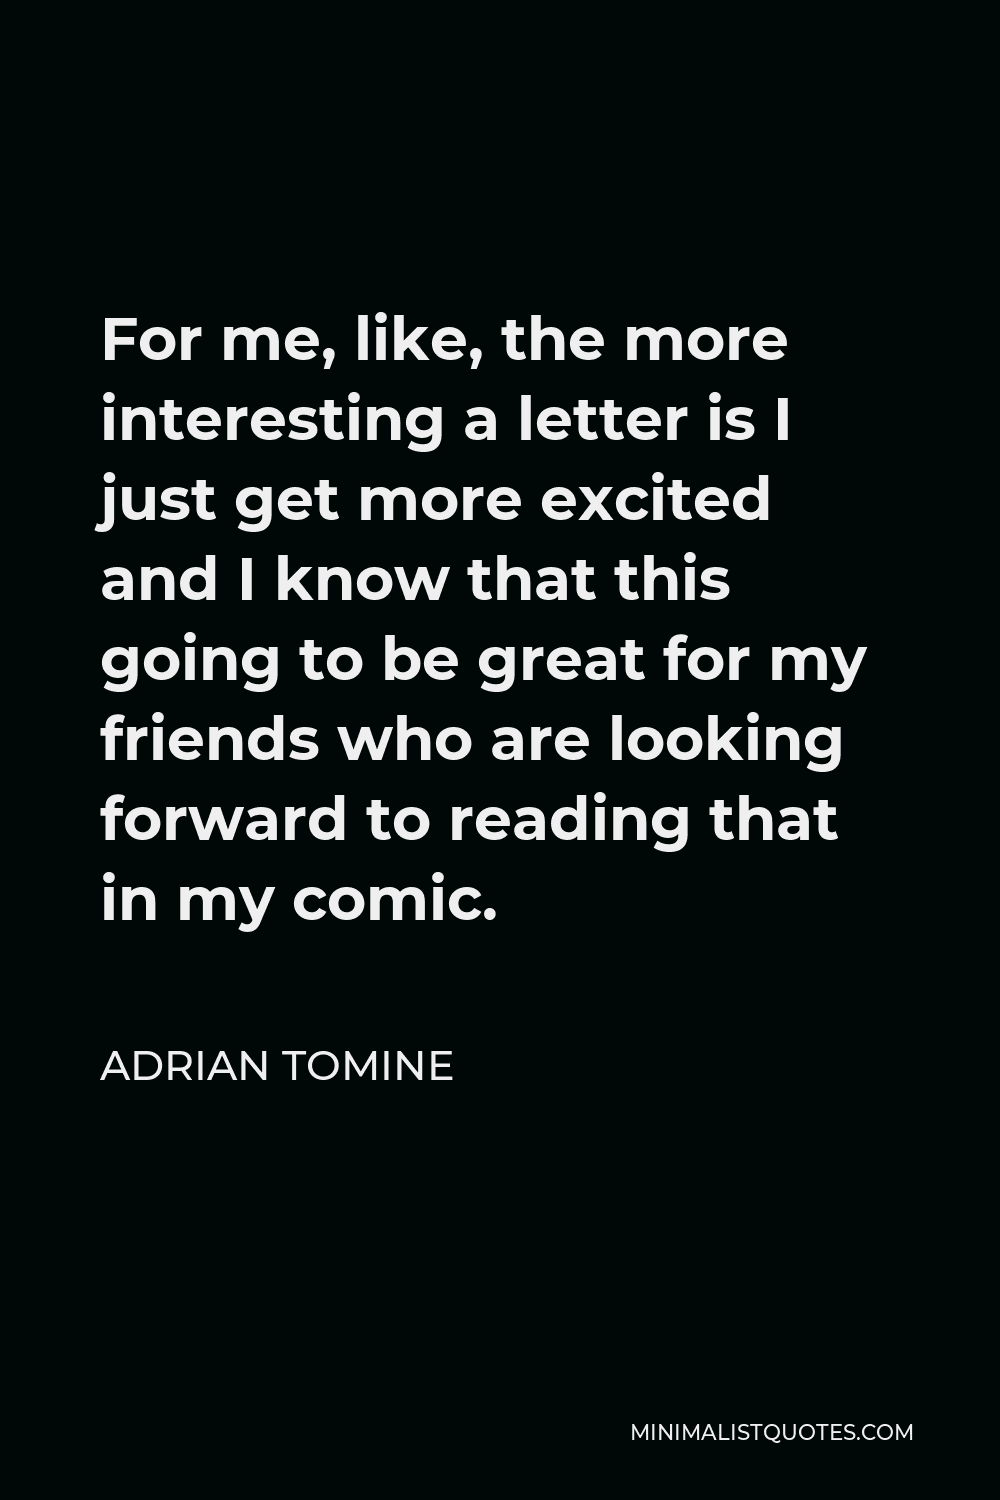 Adrian Tomine Quote - For me, like, the more interesting a letter is I just get more excited and I know that this going to be great for my friends who are looking forward to reading that in my comic.